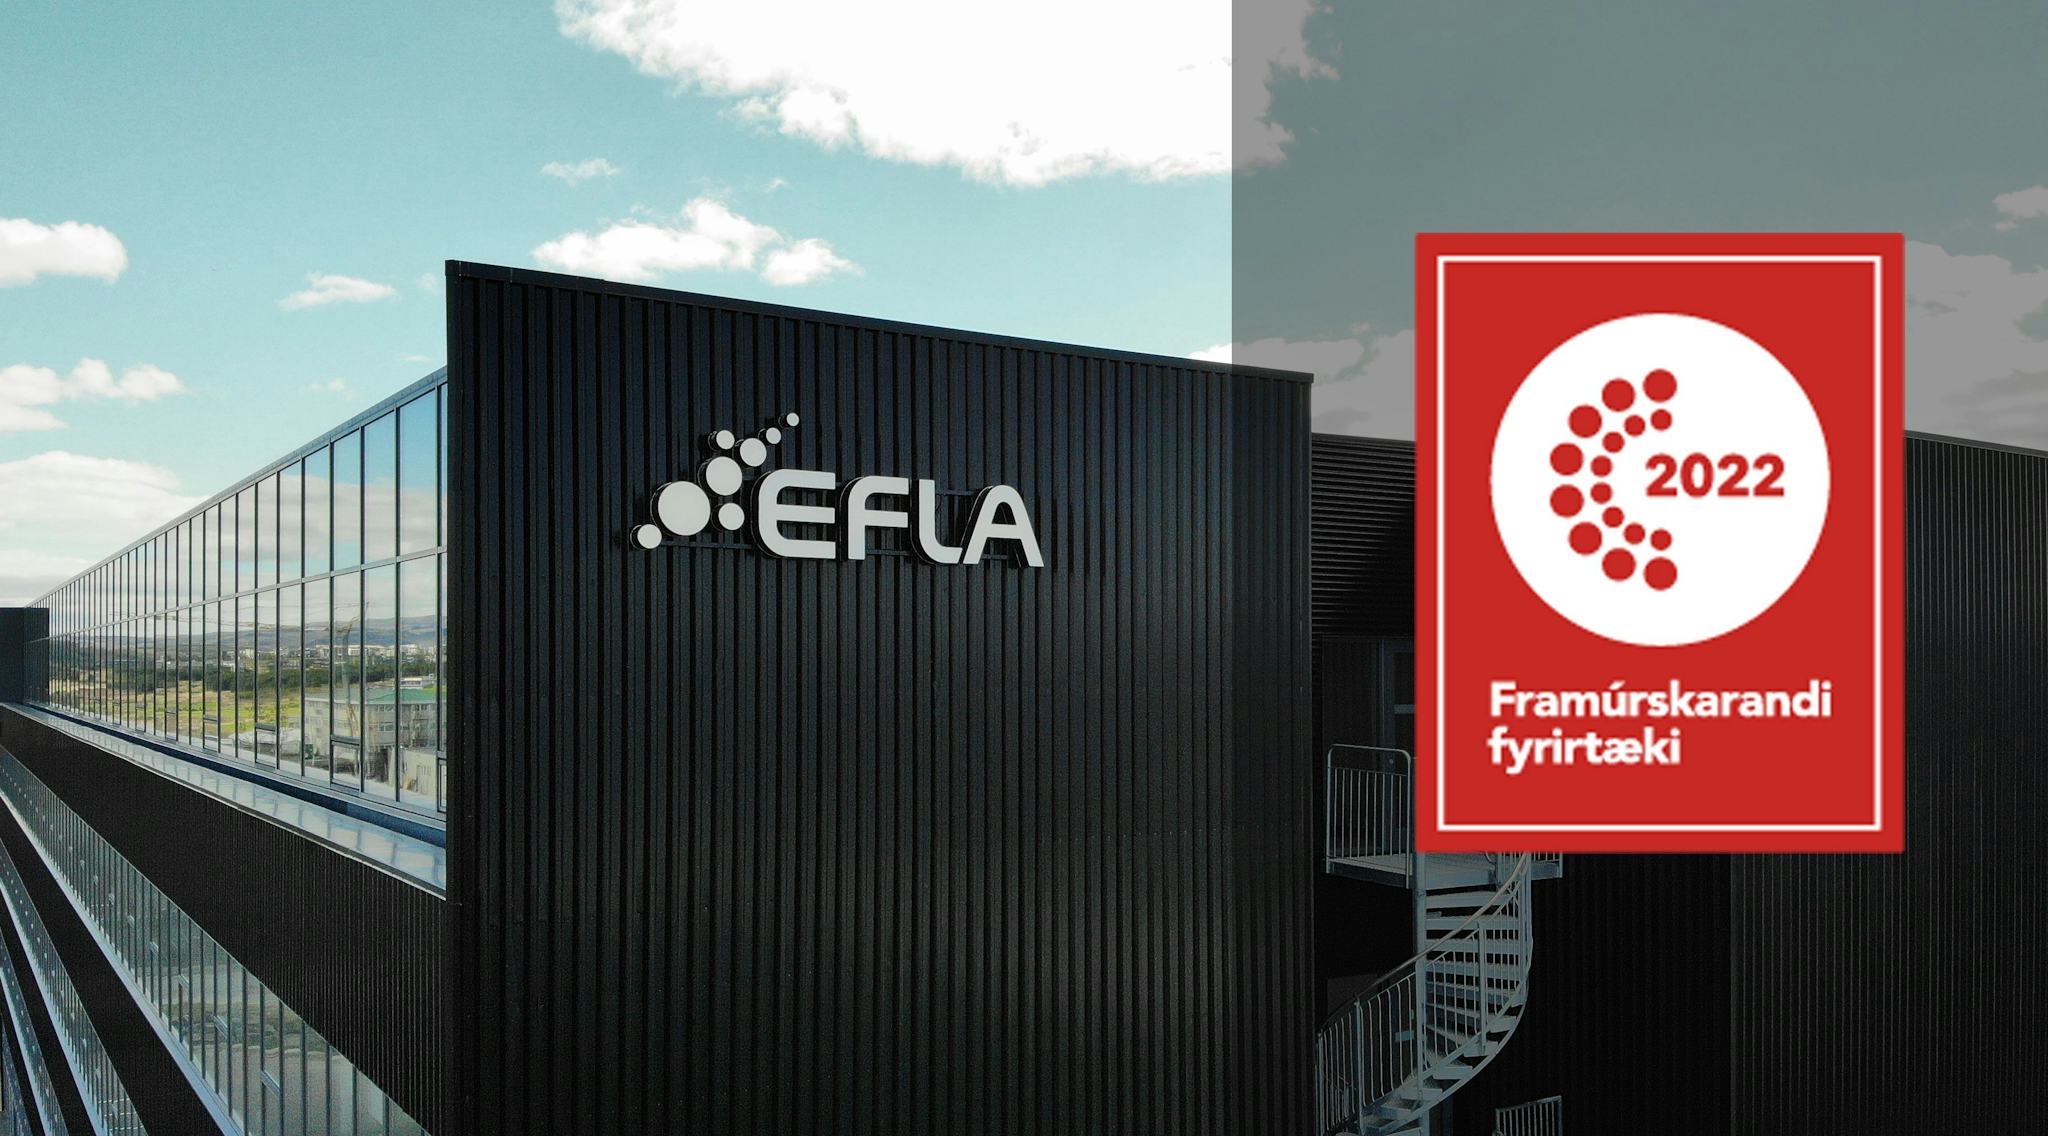 A modern building with large windows and name "EFLA" on its facade, next to a red sign with the year "2022" and the text "Framurskarandi fyrirtæki"